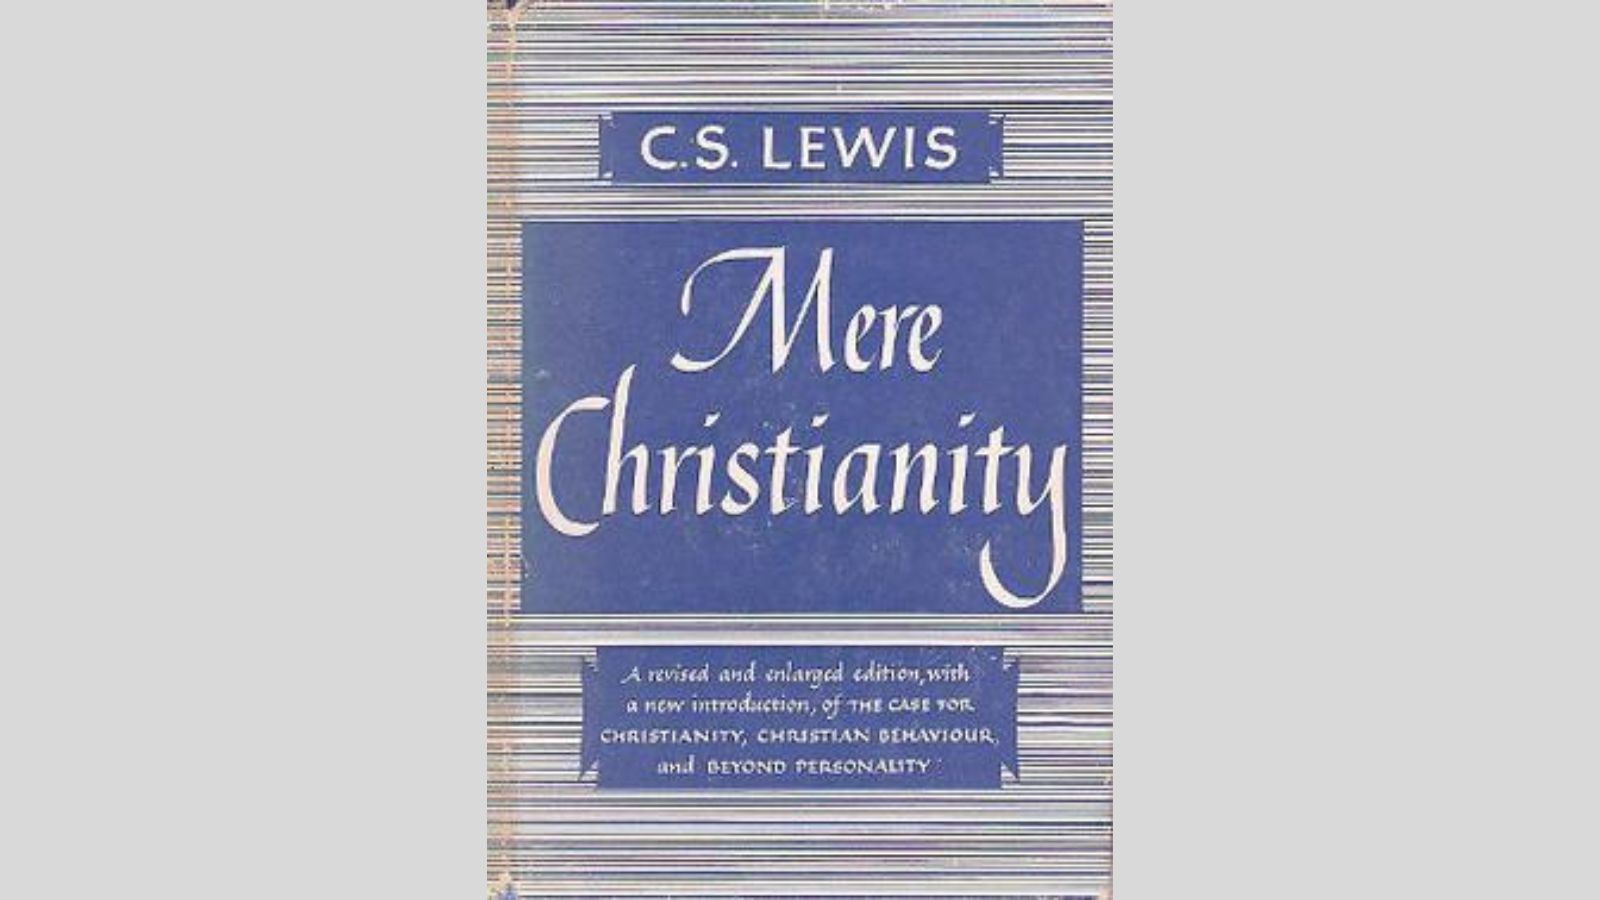 <p>During World War II, amidst Britain’s battle against Hitler’s Germany, C.S. Lewis emerged as a prominent figure, broadcasting radio talks. His renowned book, “Mere Christianity,” delves into various arguments advocating for Christianity. Lewis posits that belief in God manifests in two distinct ways: through rational contemplation of His existence and through inherent moral inclinations. Offering compelling insights, this work transcends religious boundaries, appealing to a broad audience interested in philosophical exploration and ethical inquiry. It is a noteworthy read for individuals of all faith backgrounds.</p>